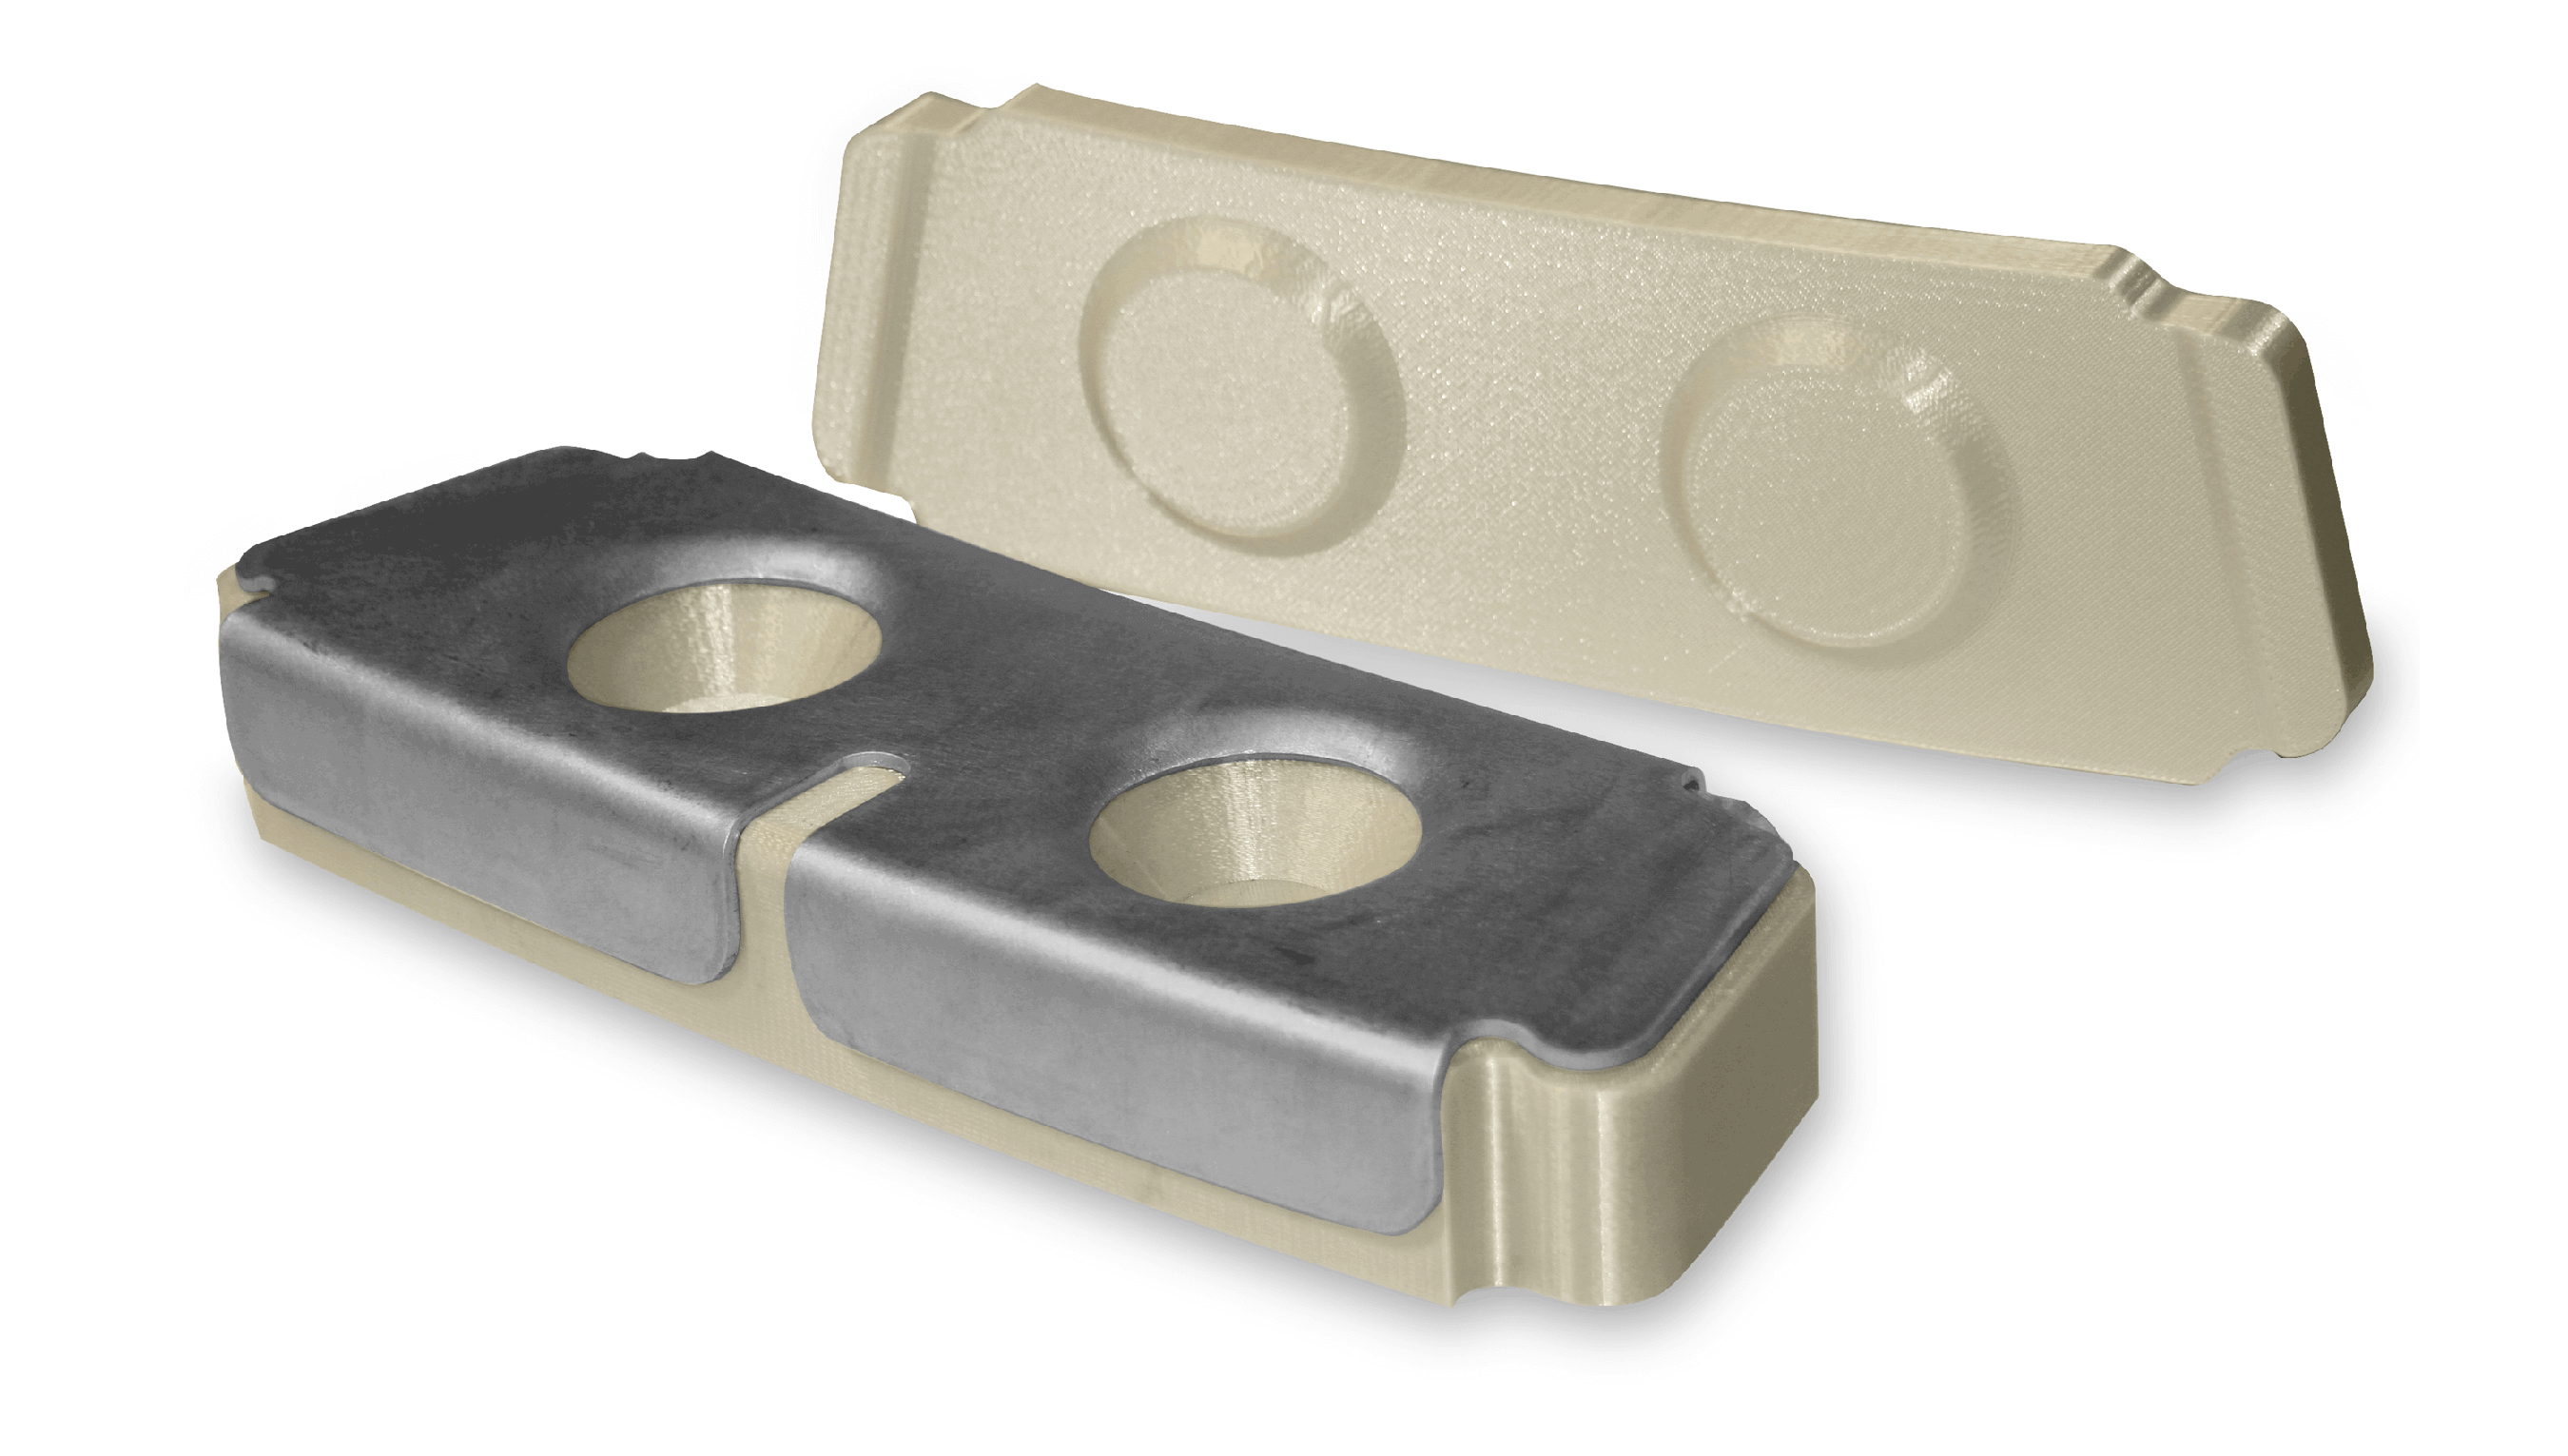 FDM 3D printed Tooling for Sheet Metal Forming Hydroforming and Rubber Pad Press